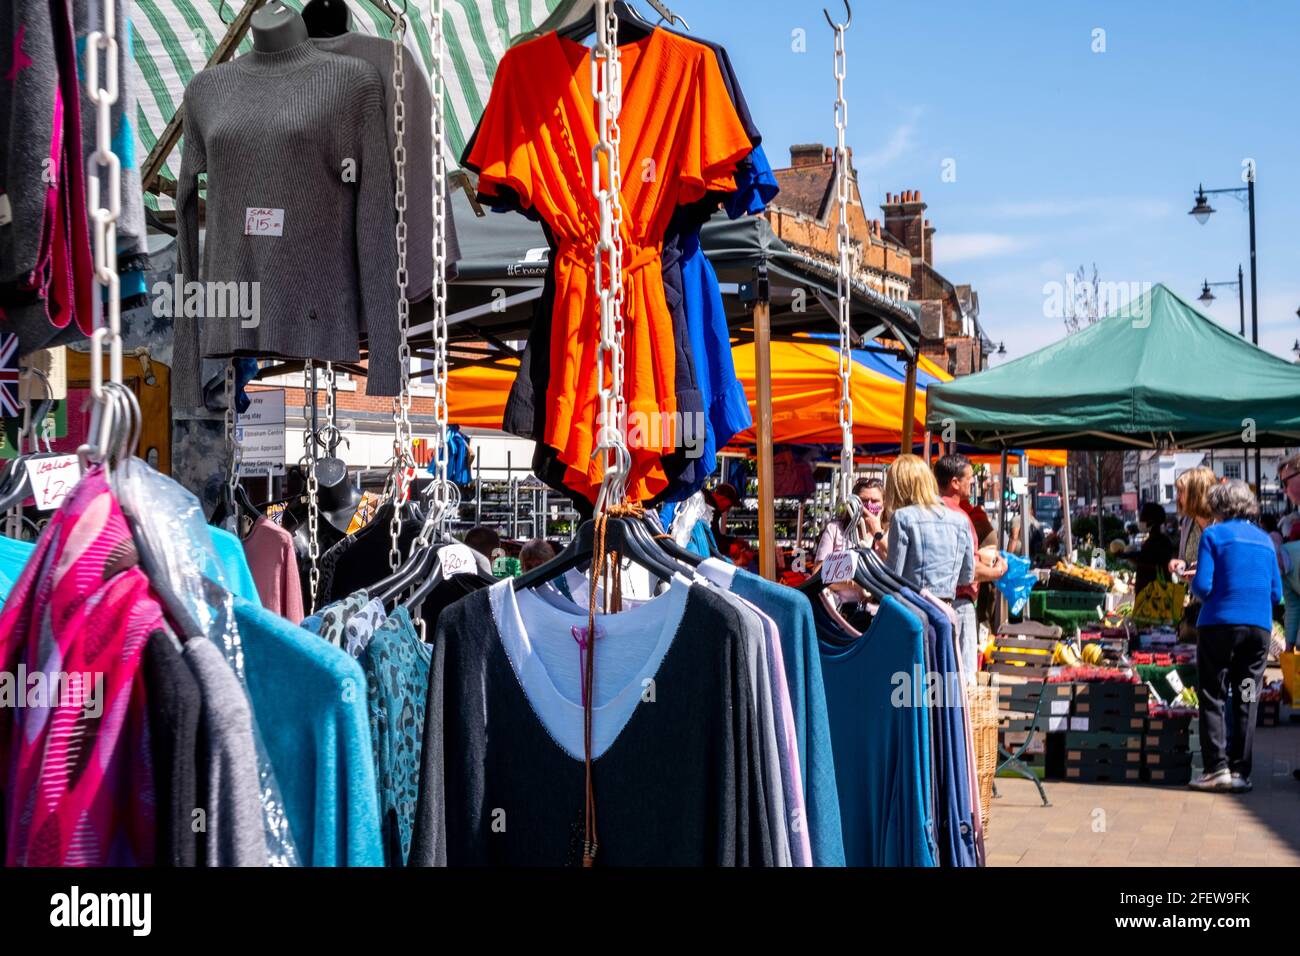 Epsom Surrey, London England UK, April 23 2021, Outdoor Market Street Trader Selling A Collection Of Womans Fashion Clothing Stock Photo